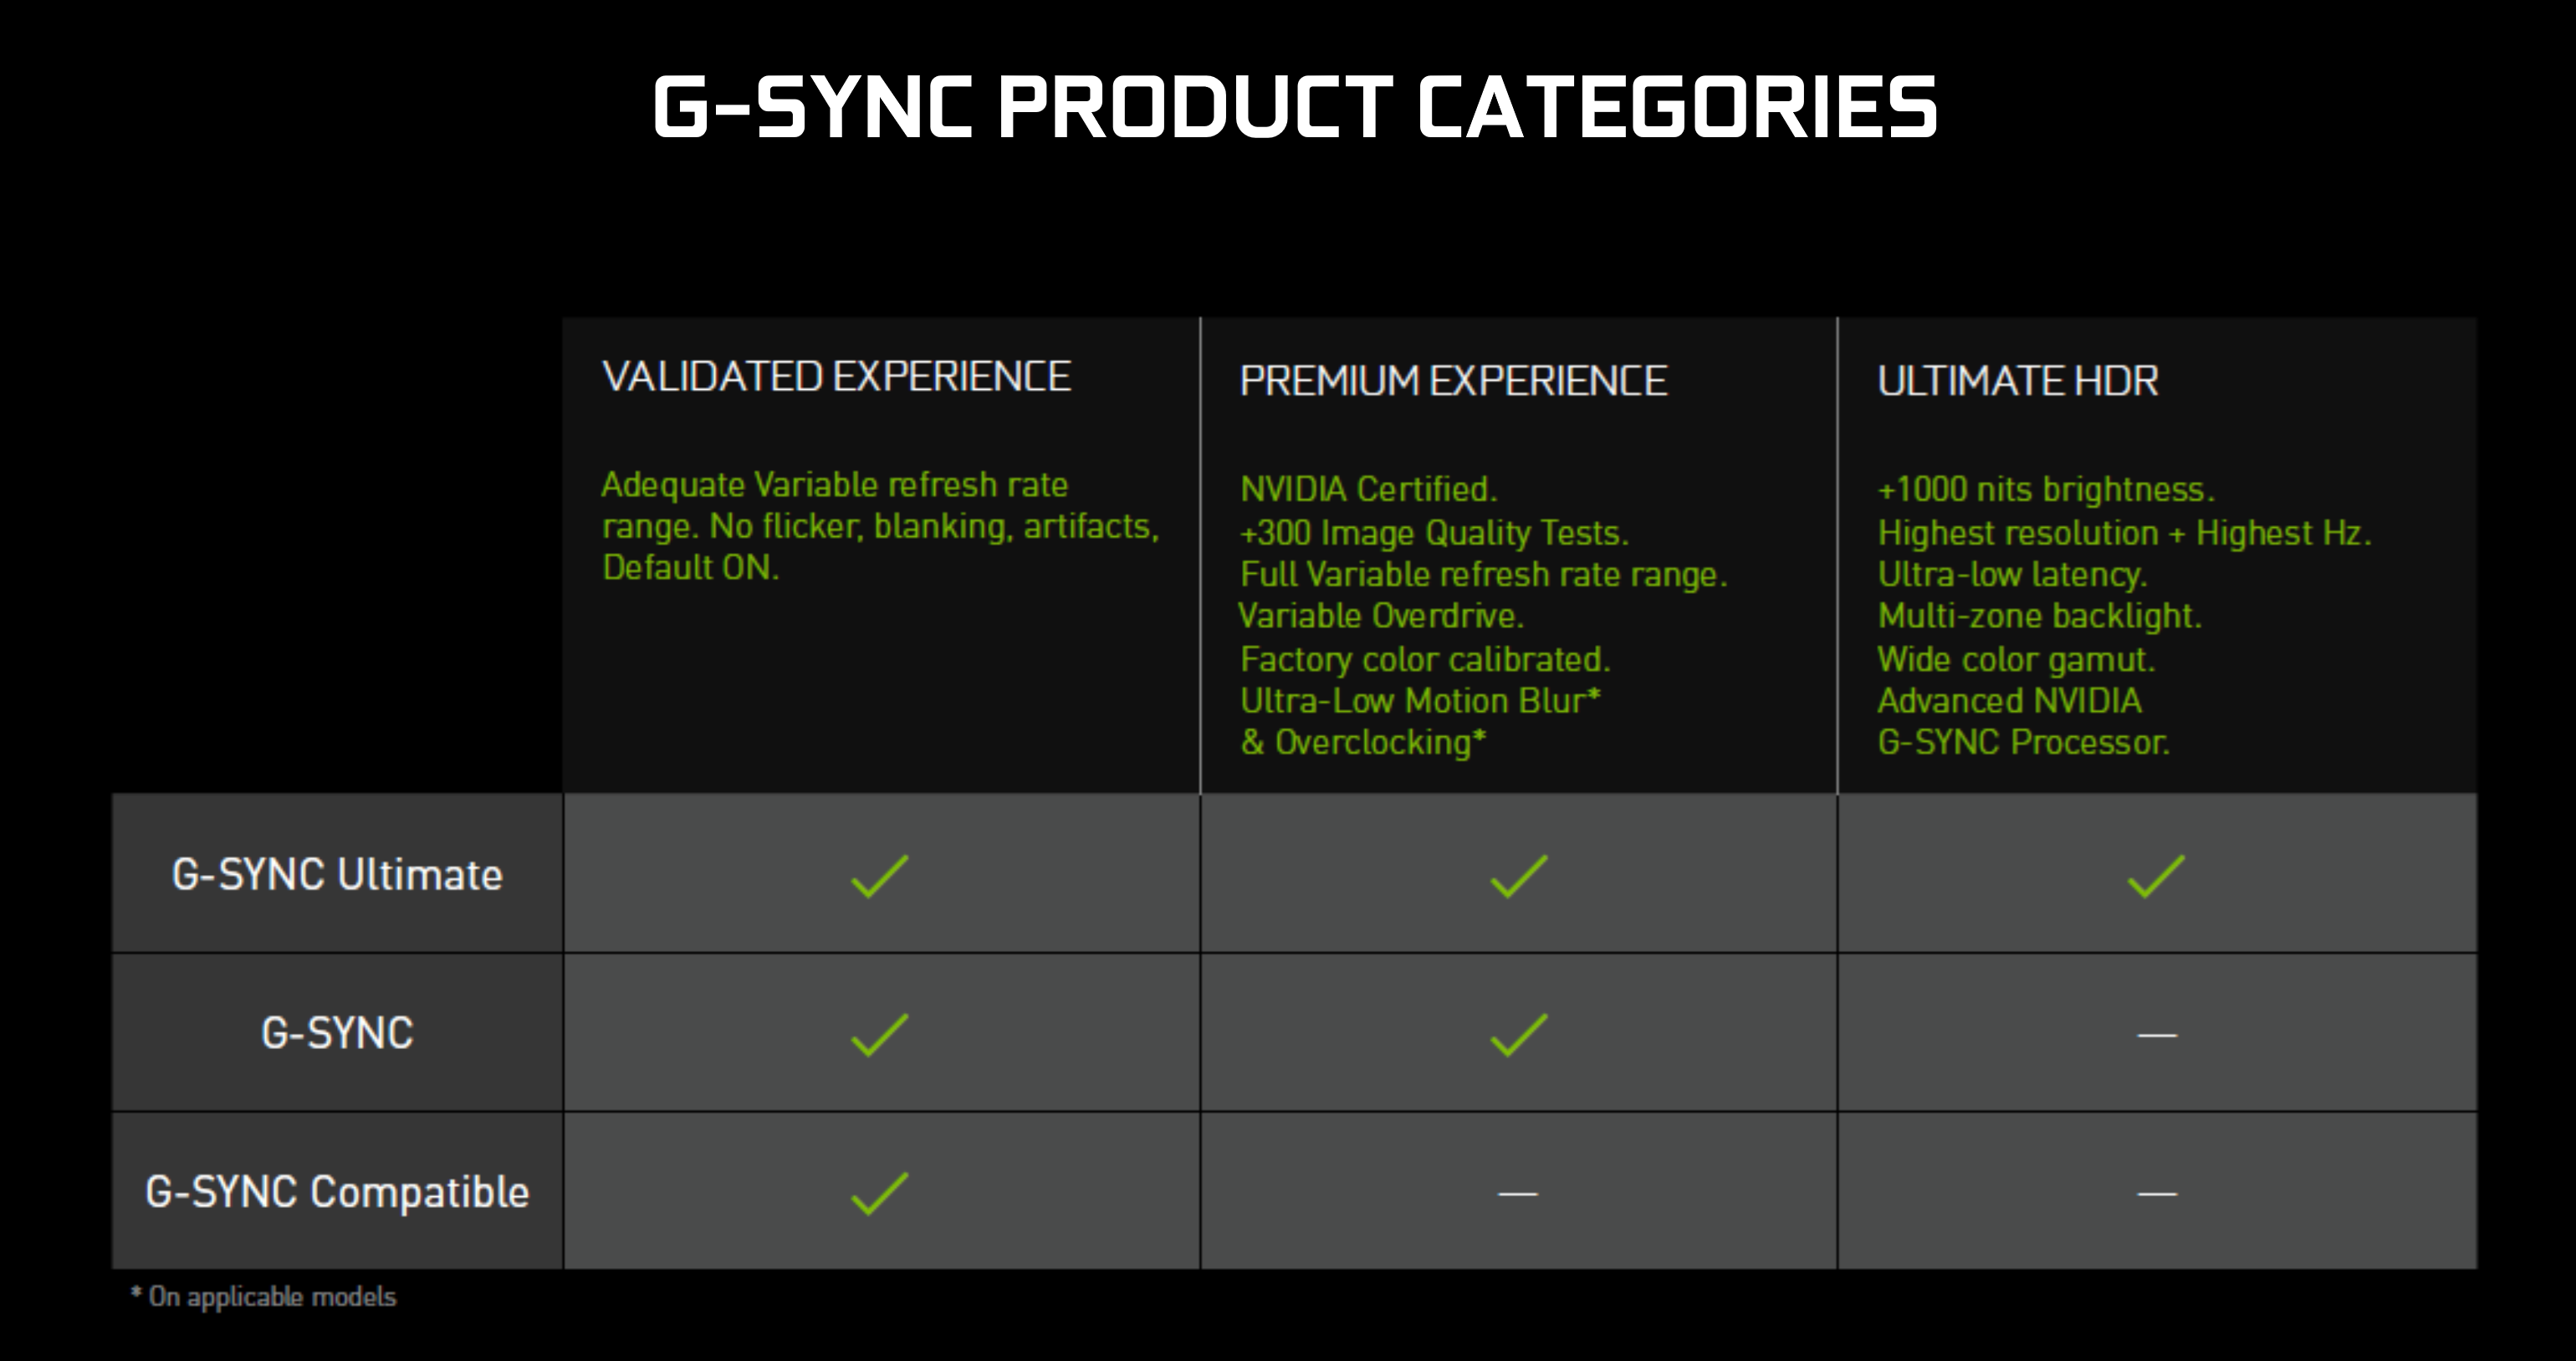 nvidia-g-sync-monitor-stack-comparison.png